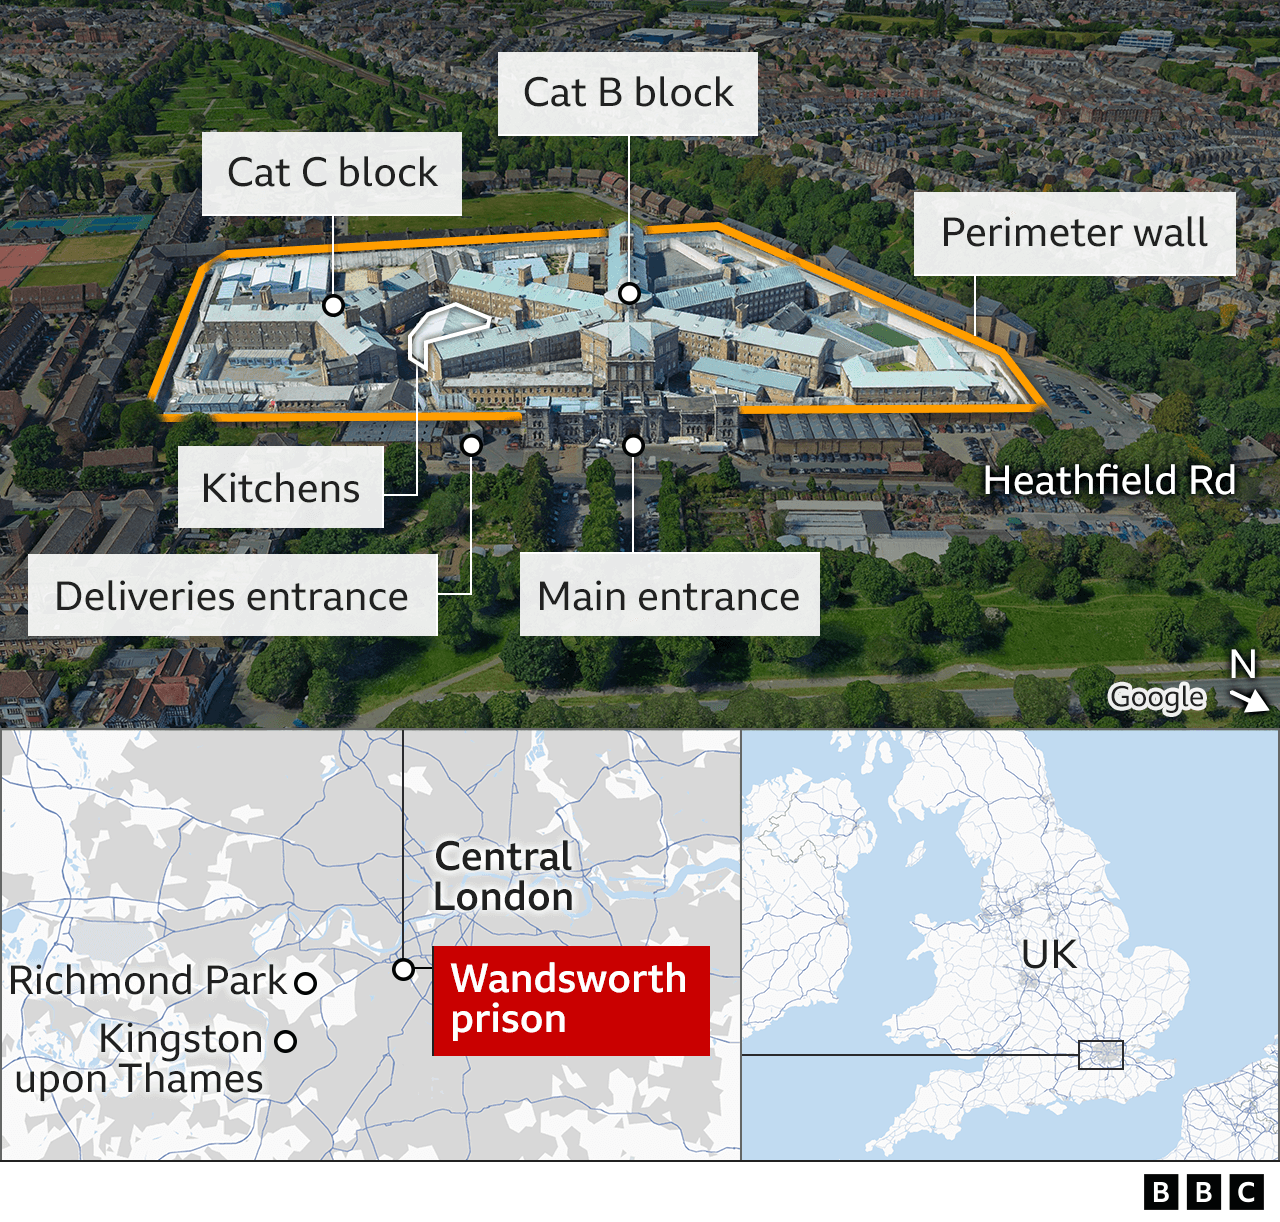 A map of HMP Wandsworth and a map showing the distance between the prison and Richmond Park and Kingston upon Thames